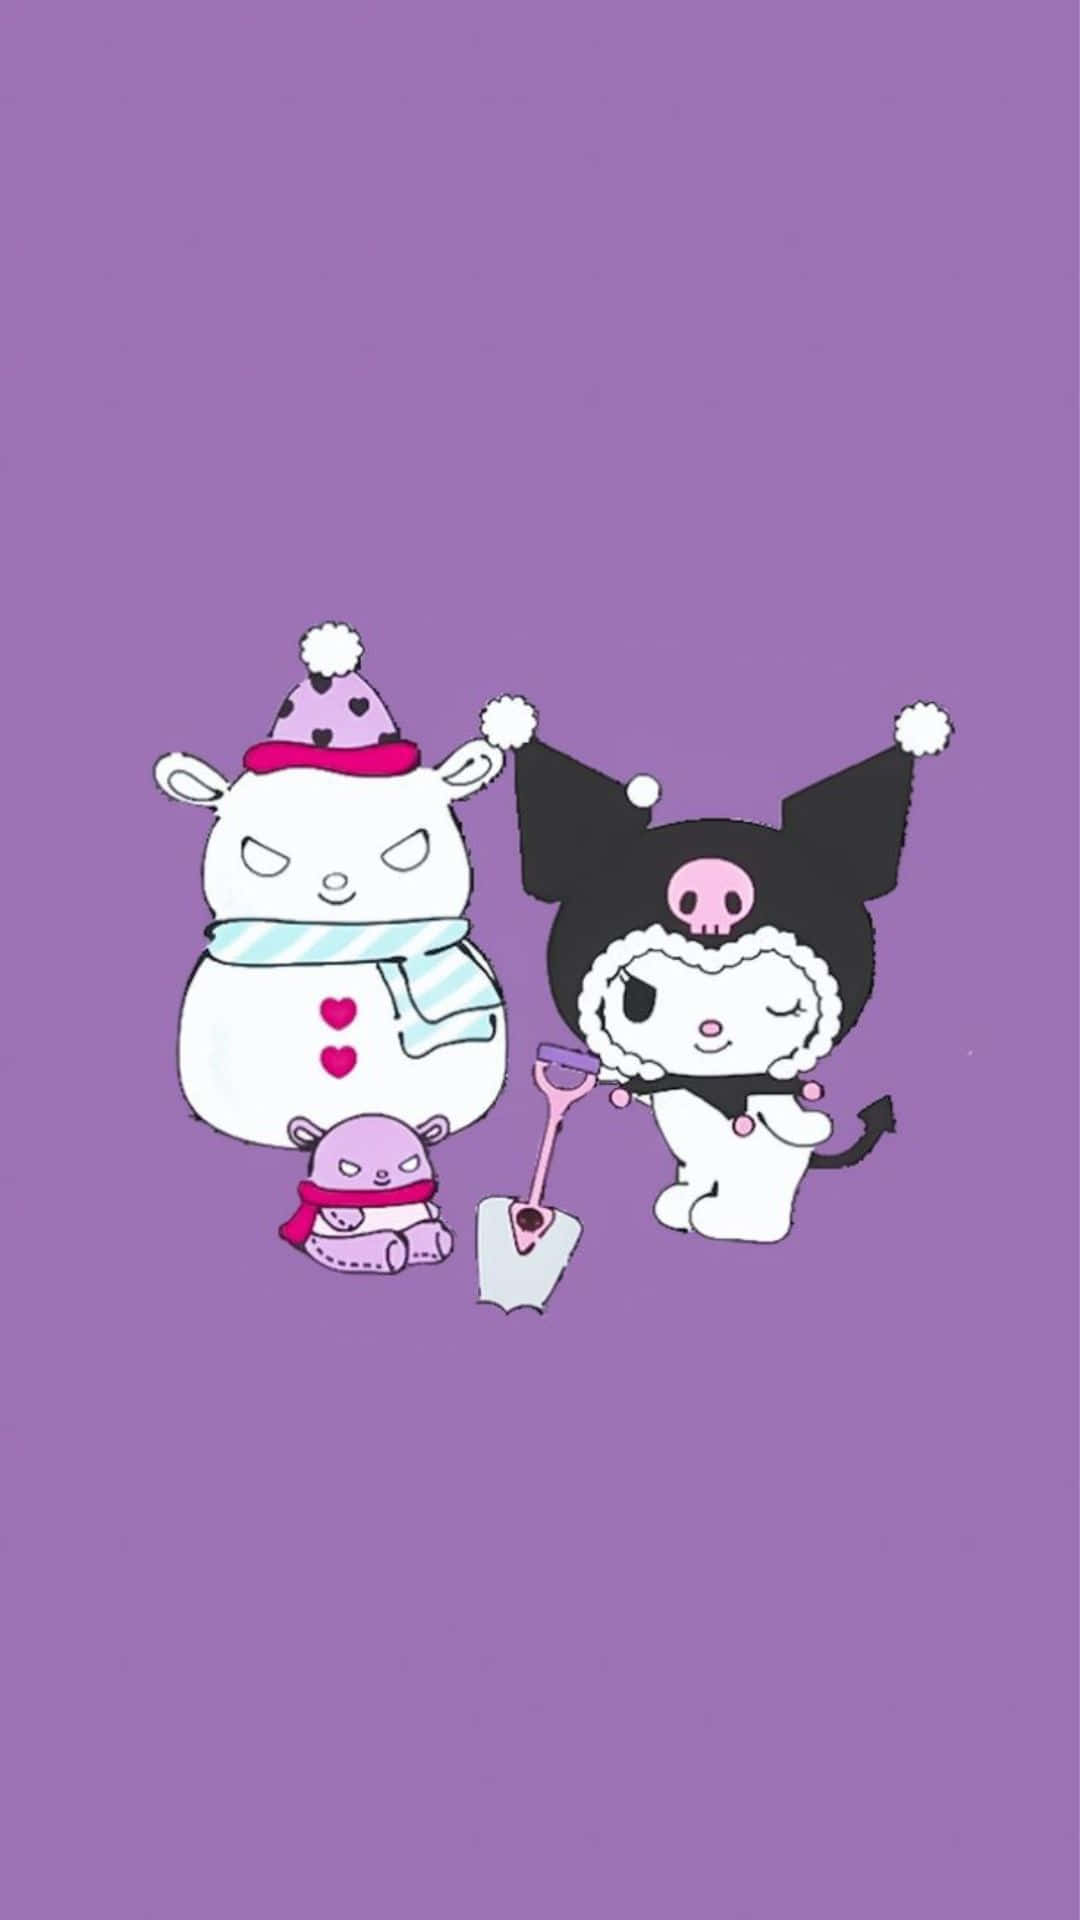  Be Positive   SANRIO CHRISTMAS WALLPAPERS From Sanrios